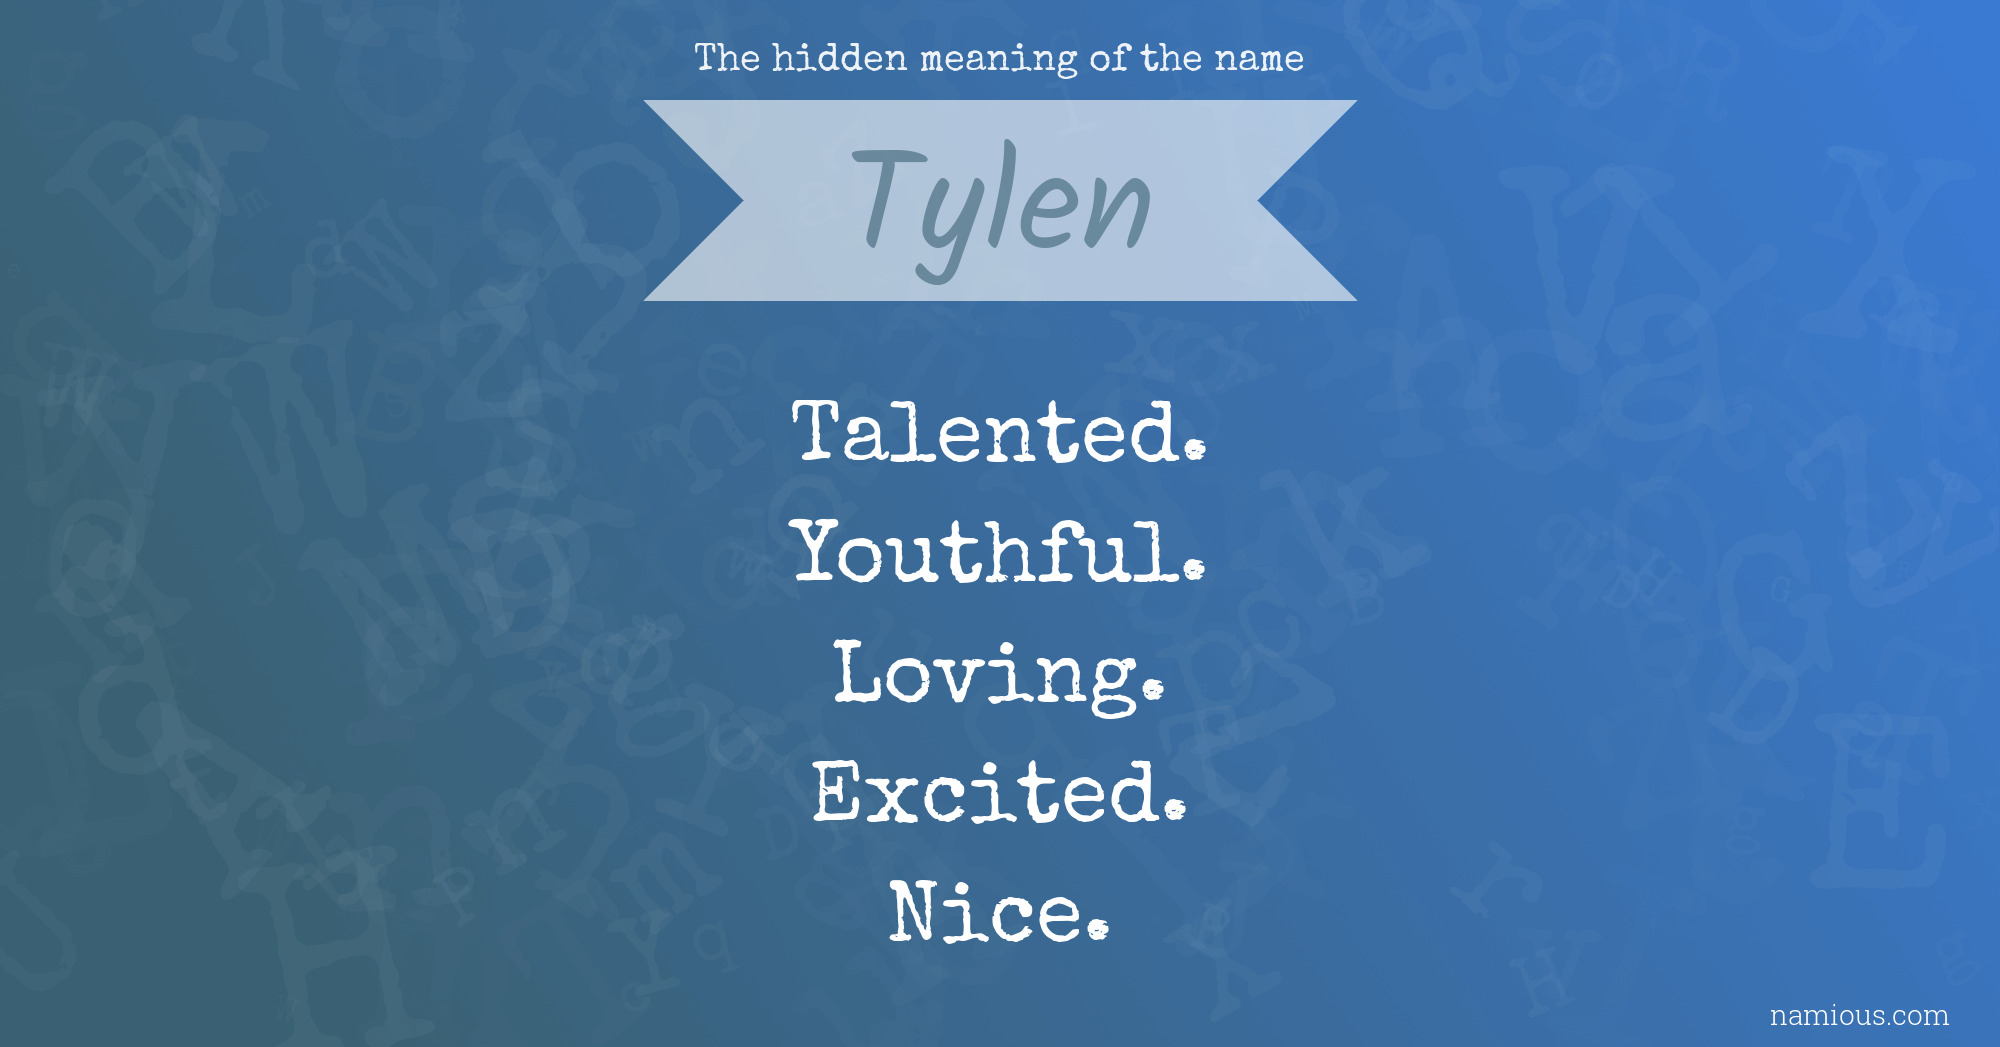 The hidden meaning of the name Tylen